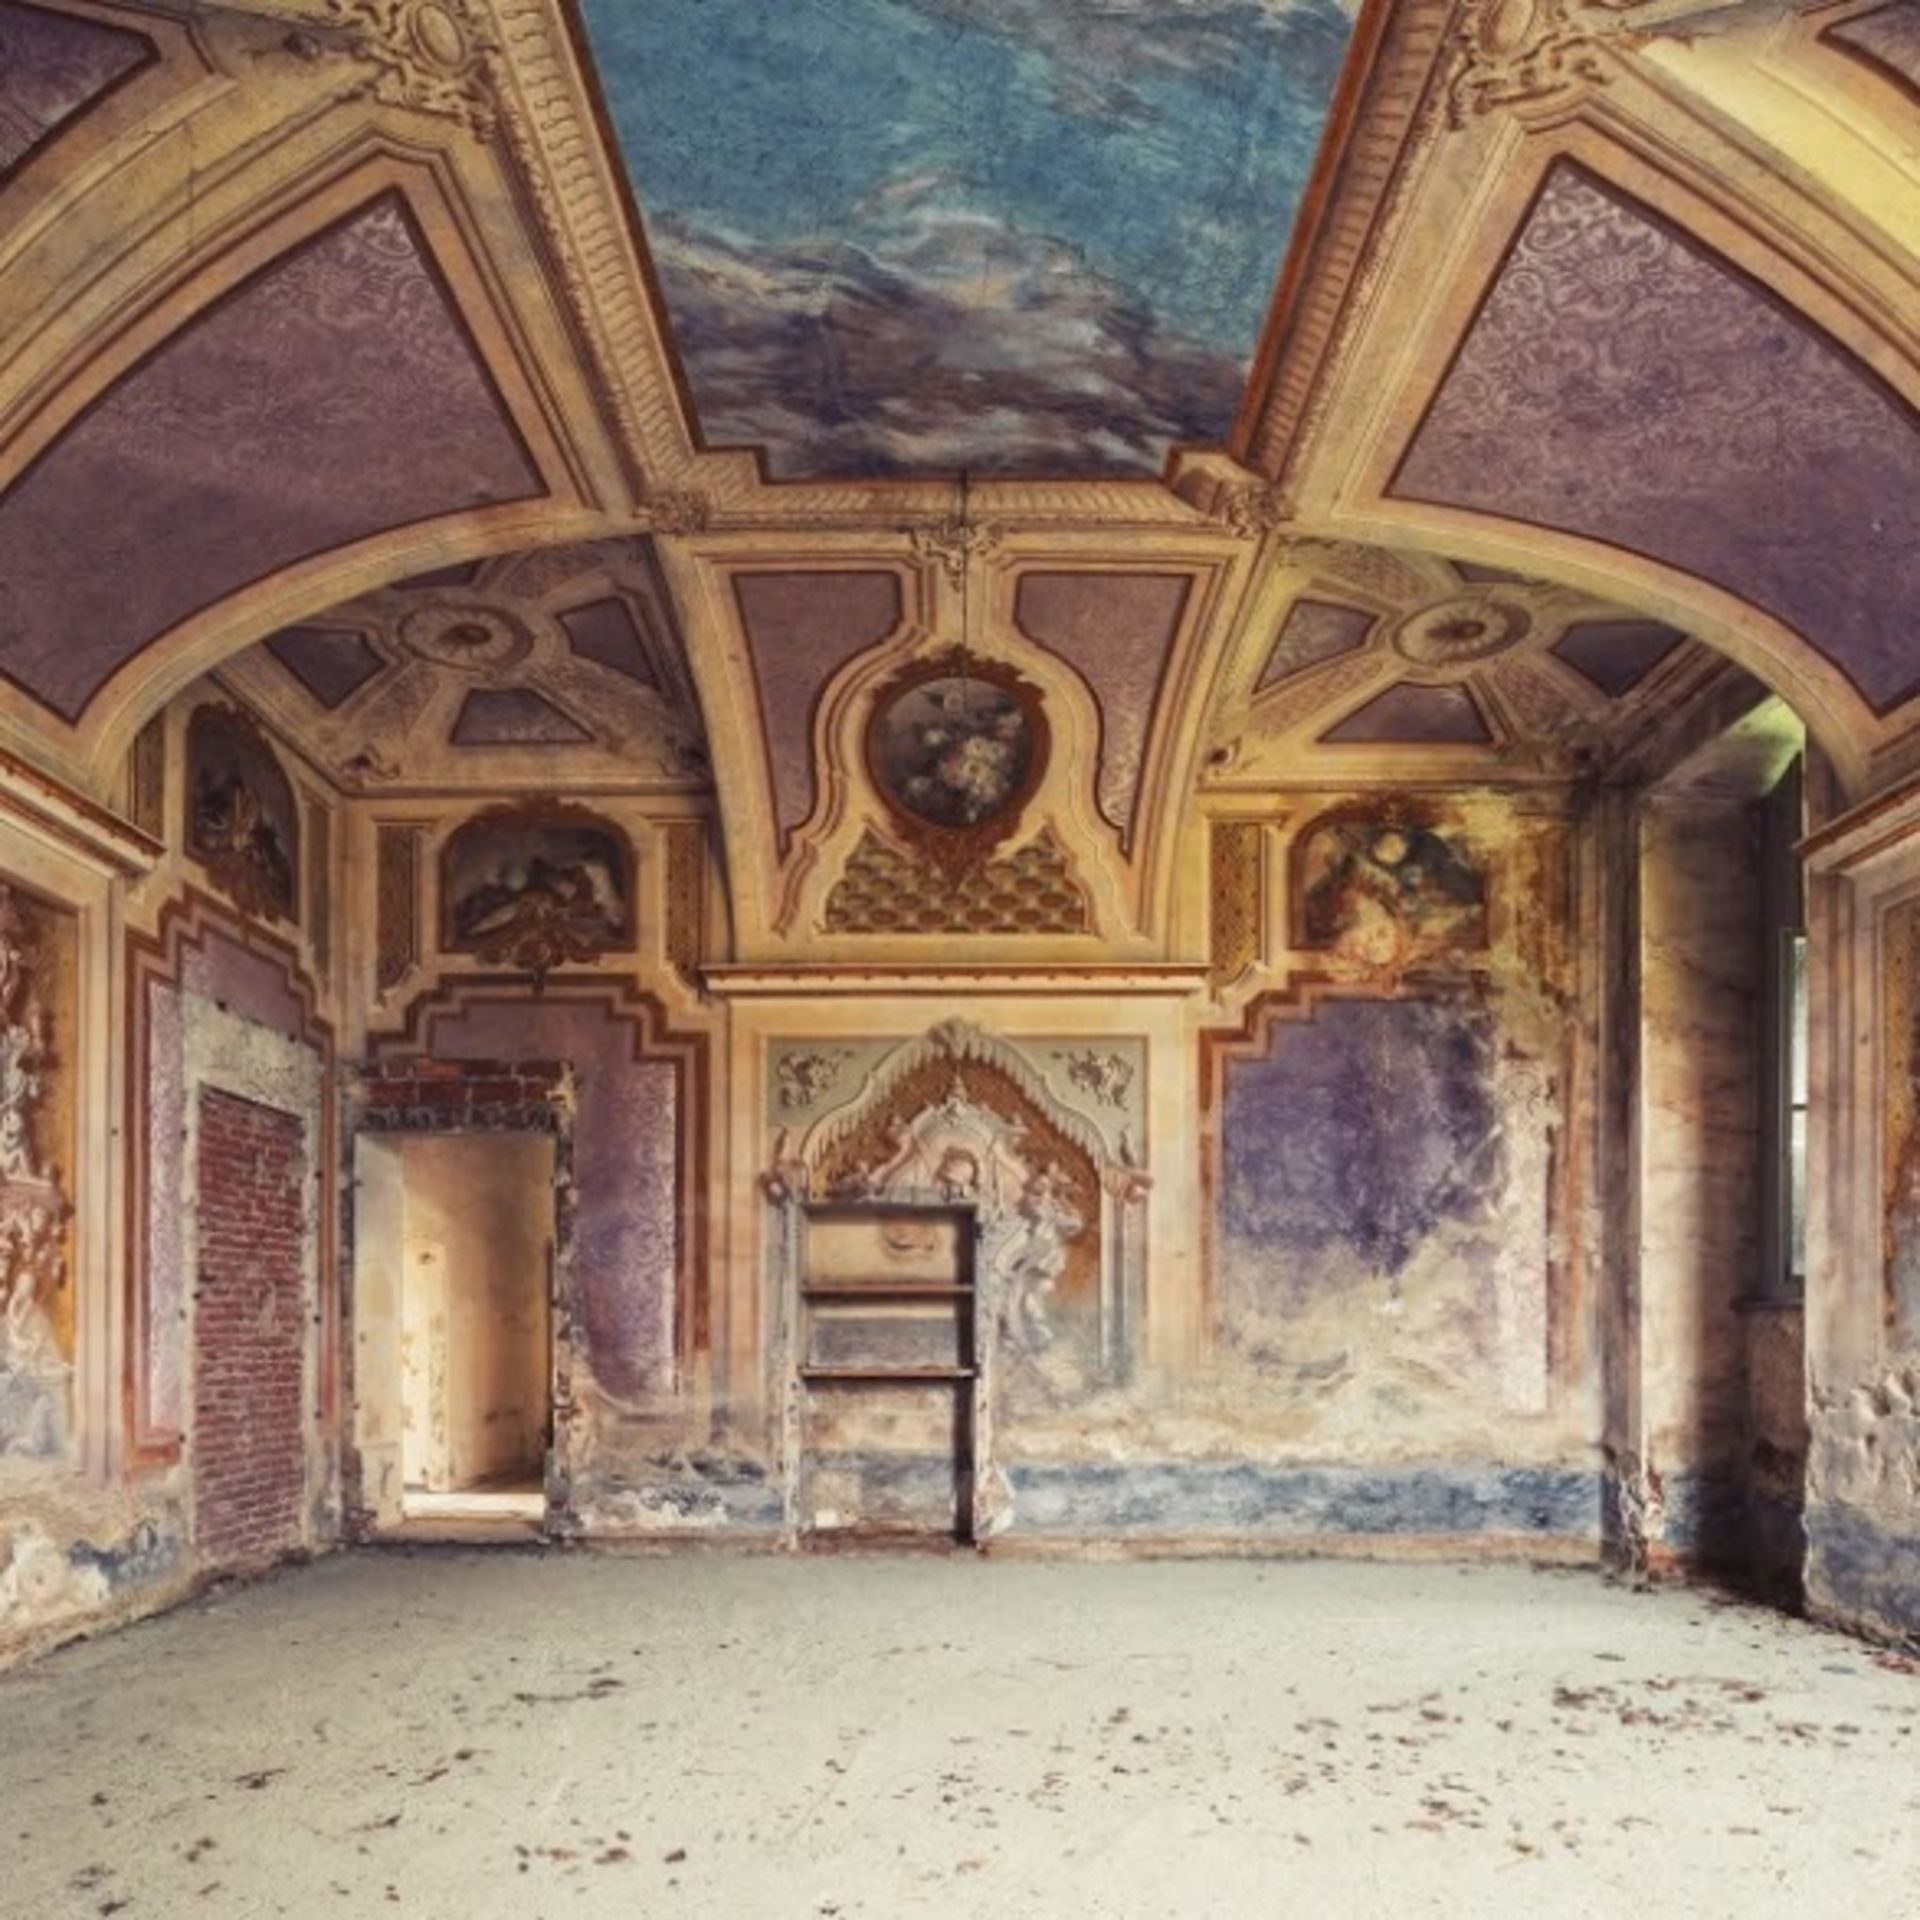 Artist: Gina Soden - Ghost town Abandoned 17th Church in Italy.